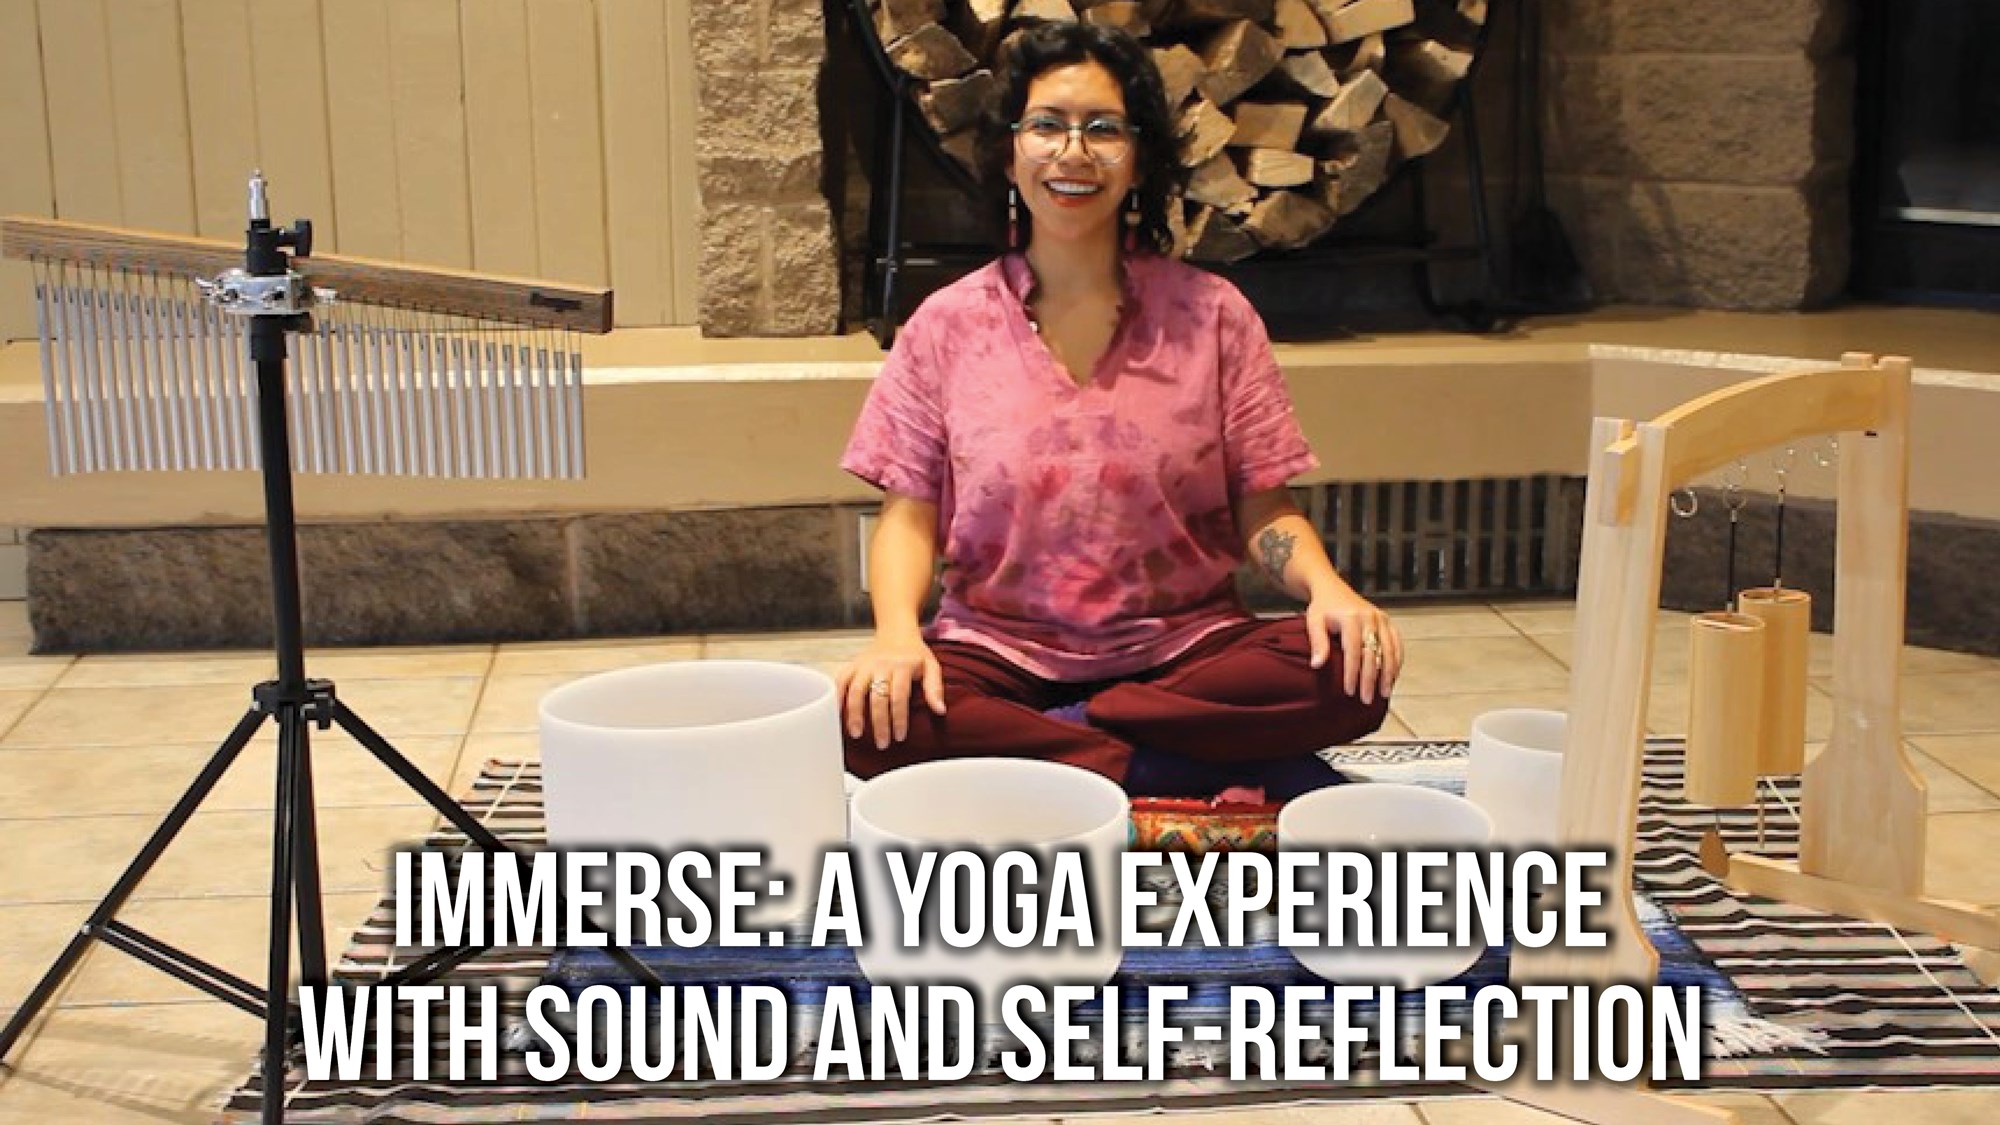 Immerse_-_A_Yoga_Experience_with_Sound_and_Self-Reflection